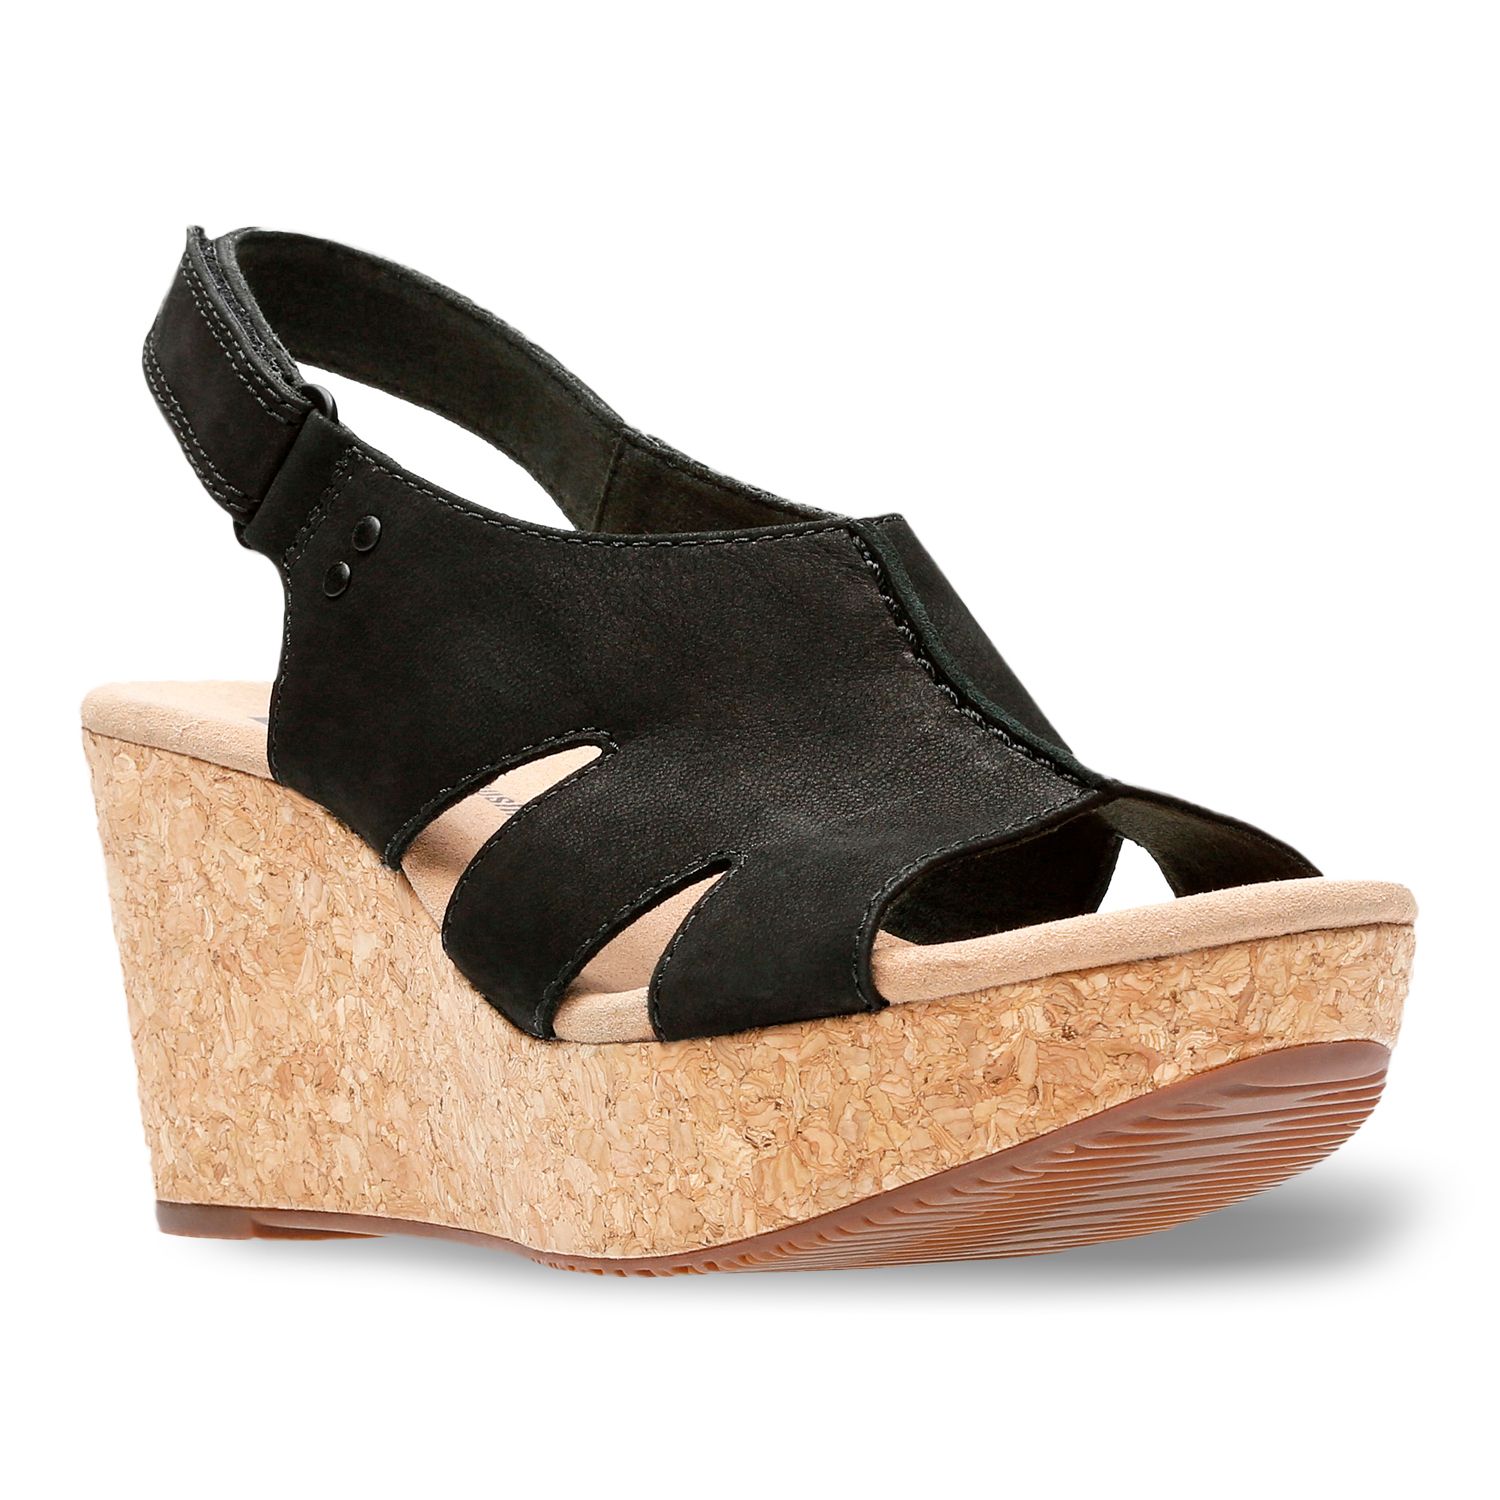 clarks women's wedge shoes